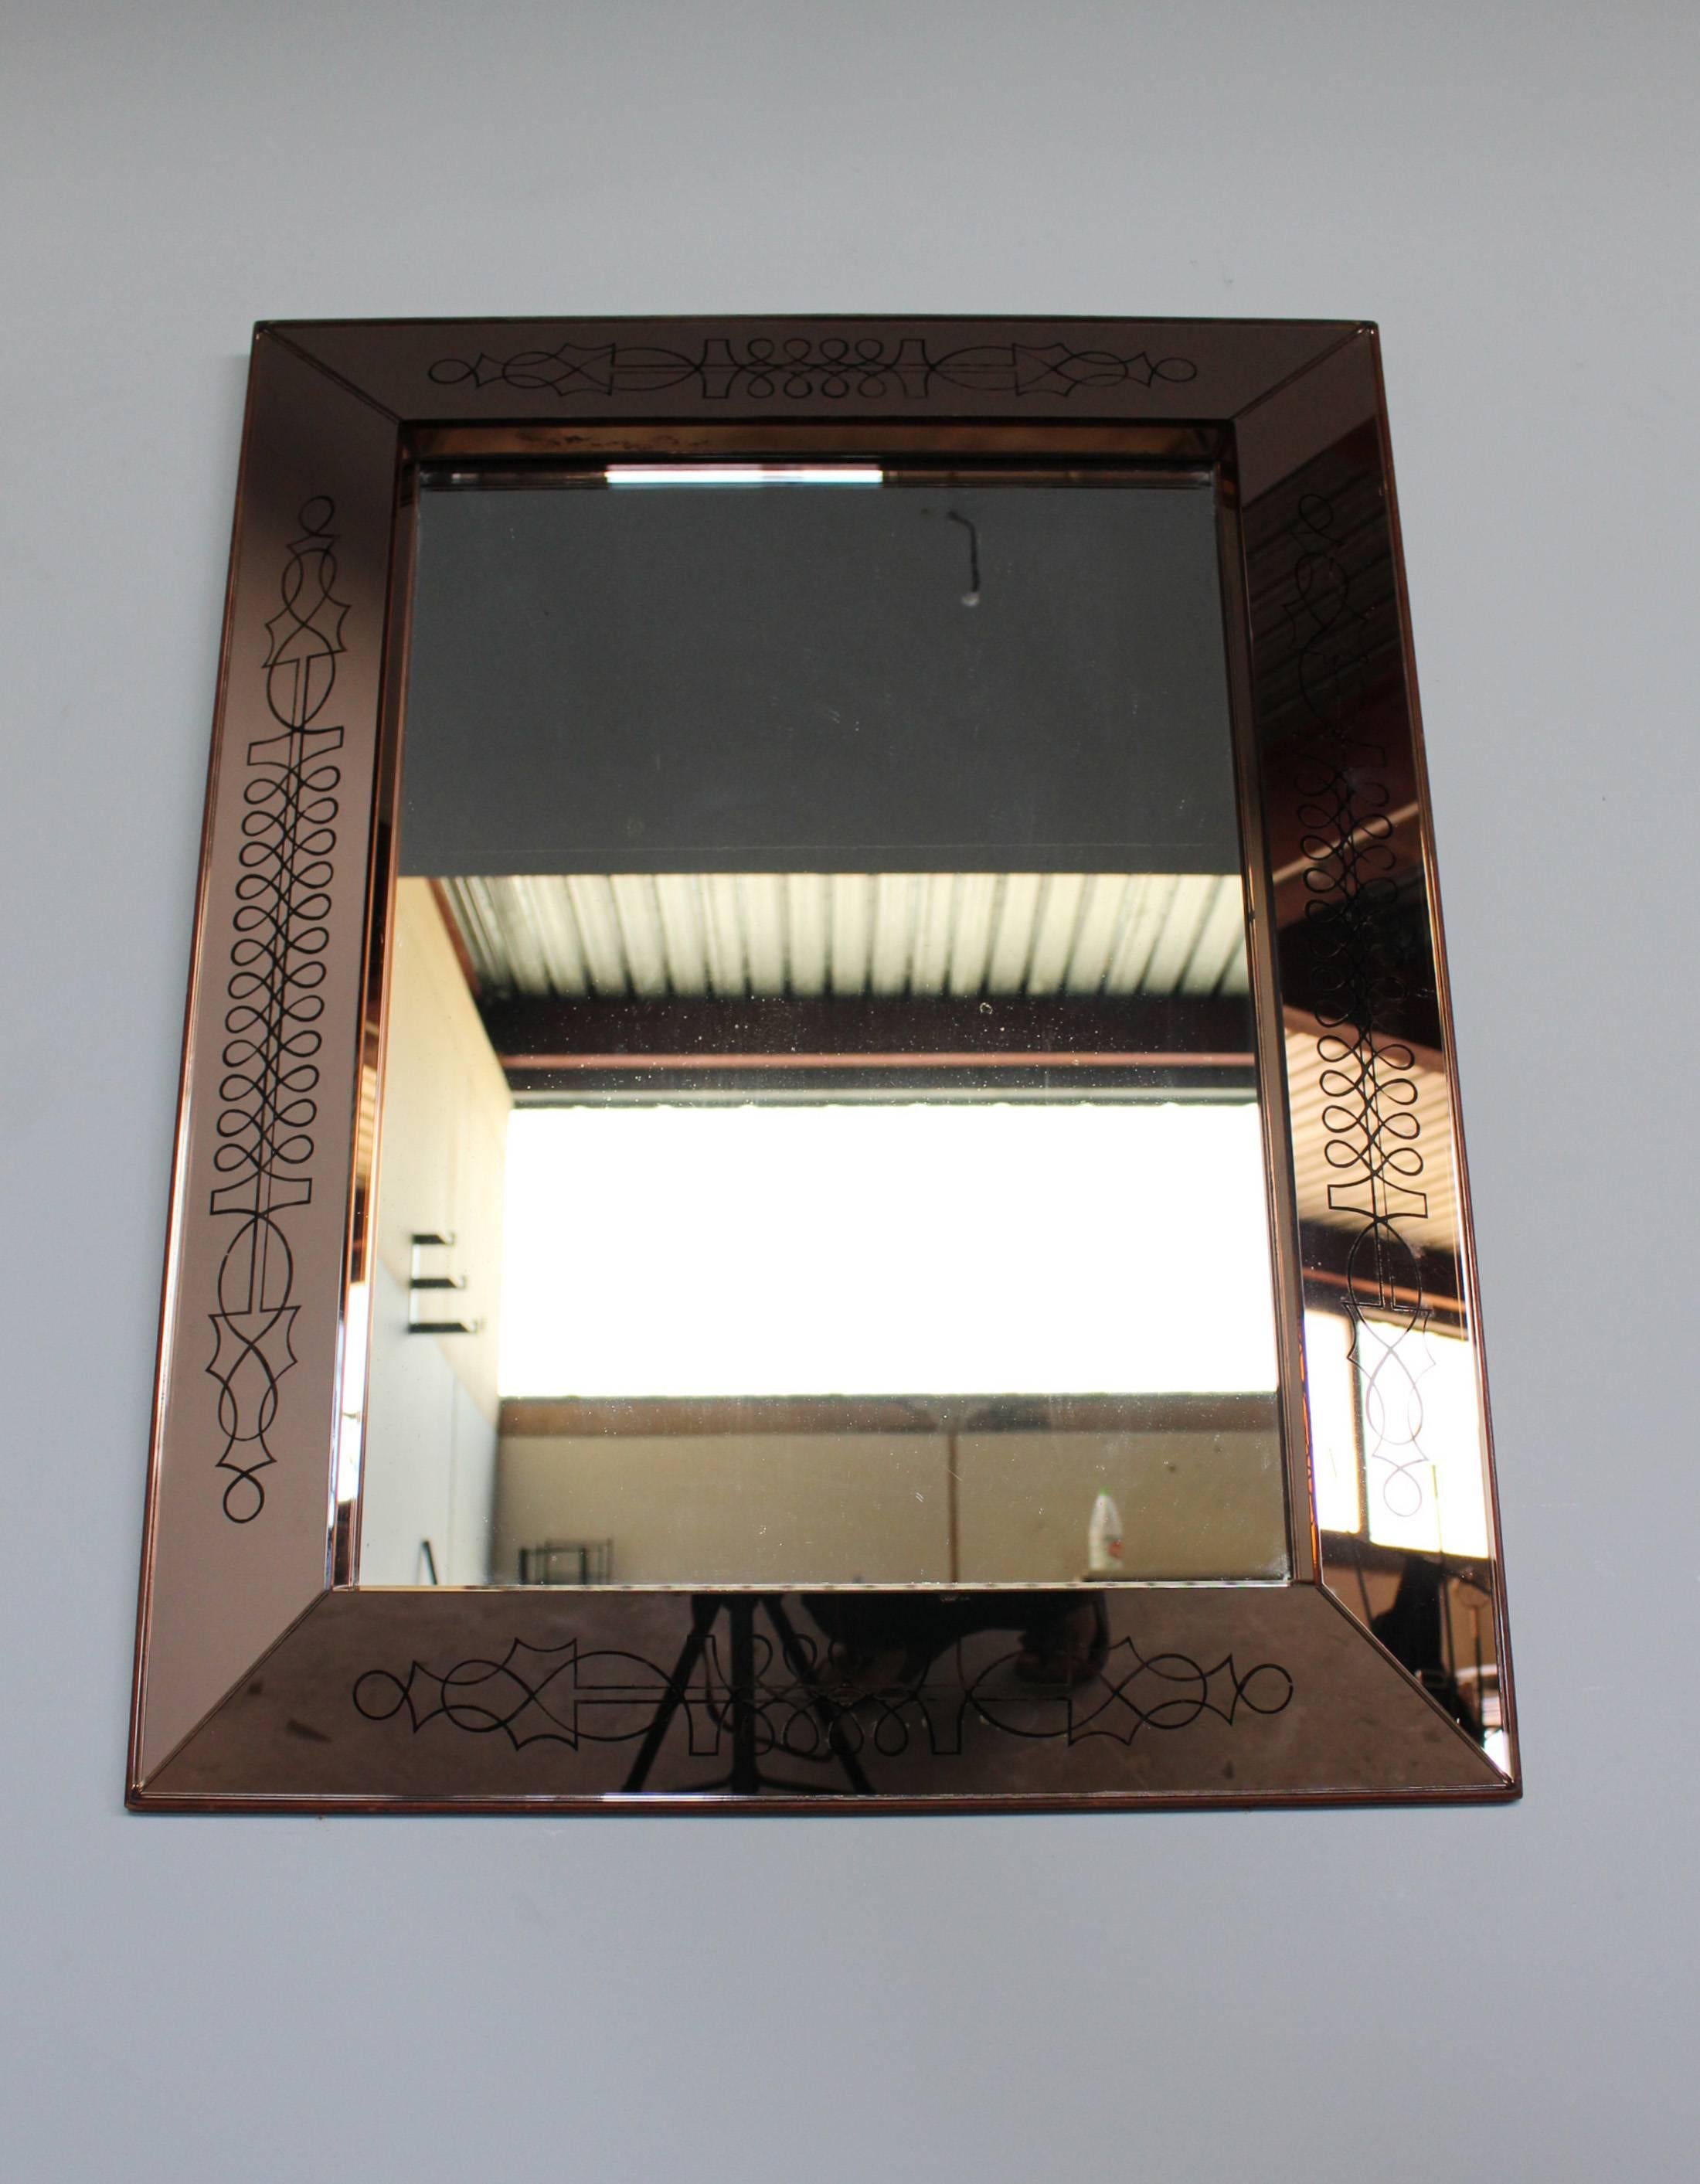 A fine French Art Deco engraved and stained rectangular mirrored framed mirror by Max Ingrand.
Documentation: Max Ingrand 